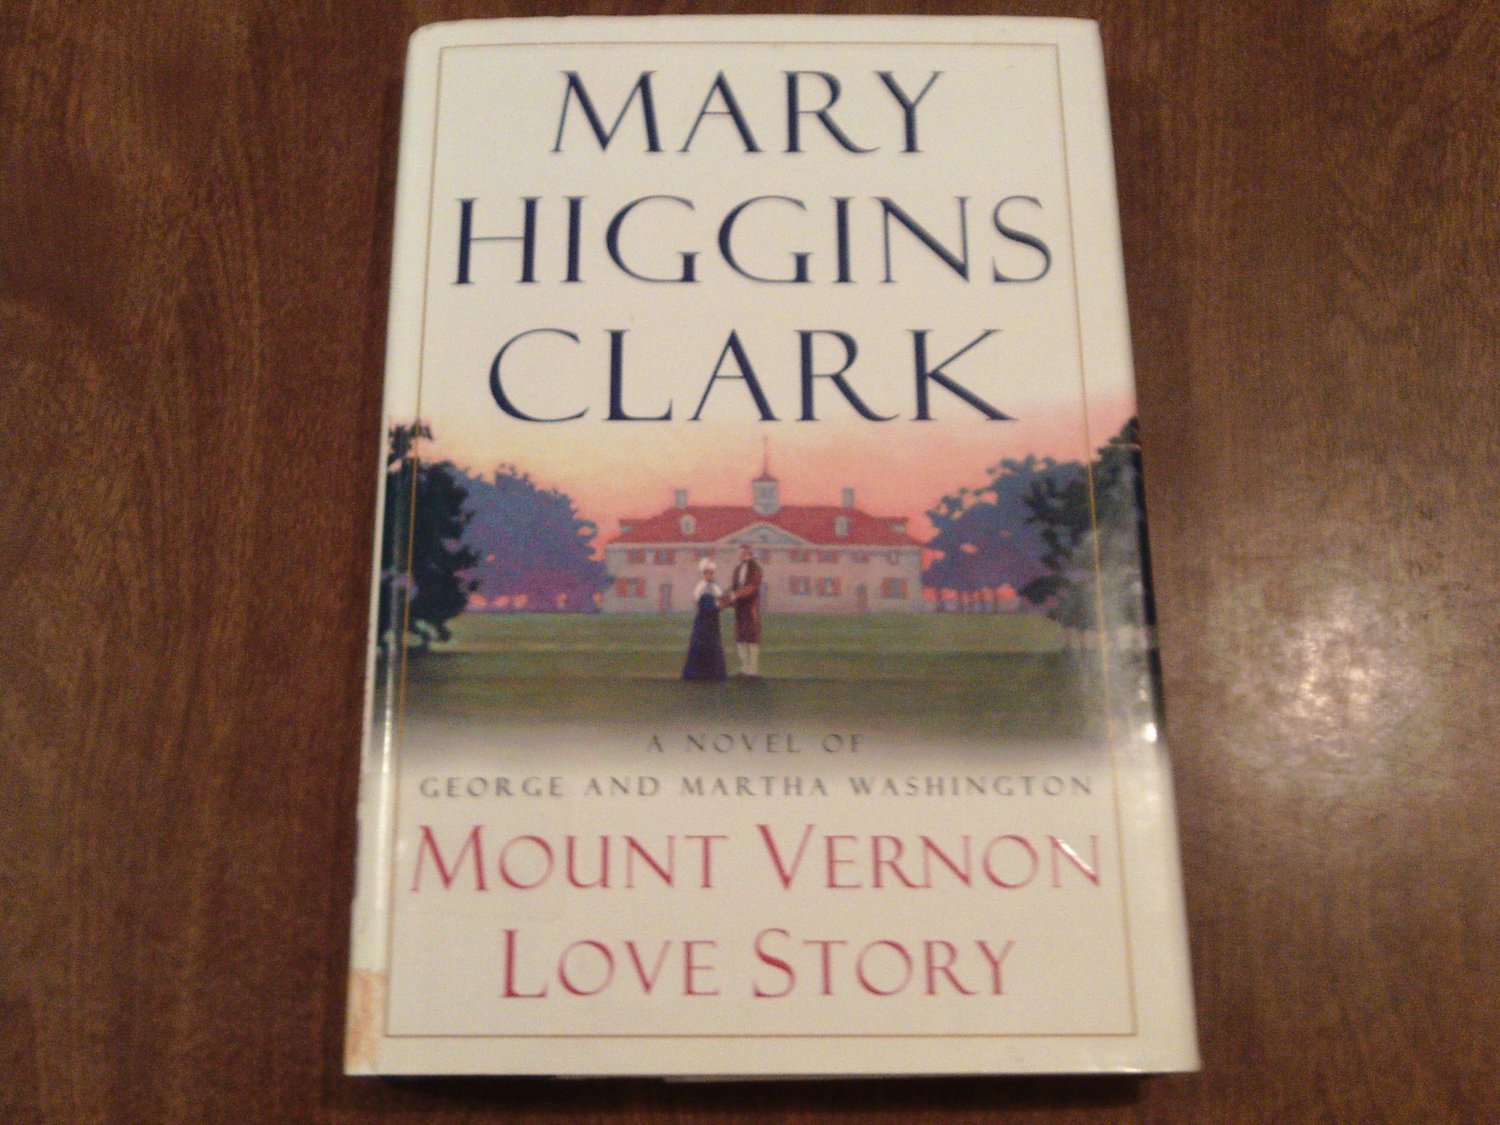 Mount Vernon Love Story by Mary Higgins Clark (2002) (G4A) Historical Romance